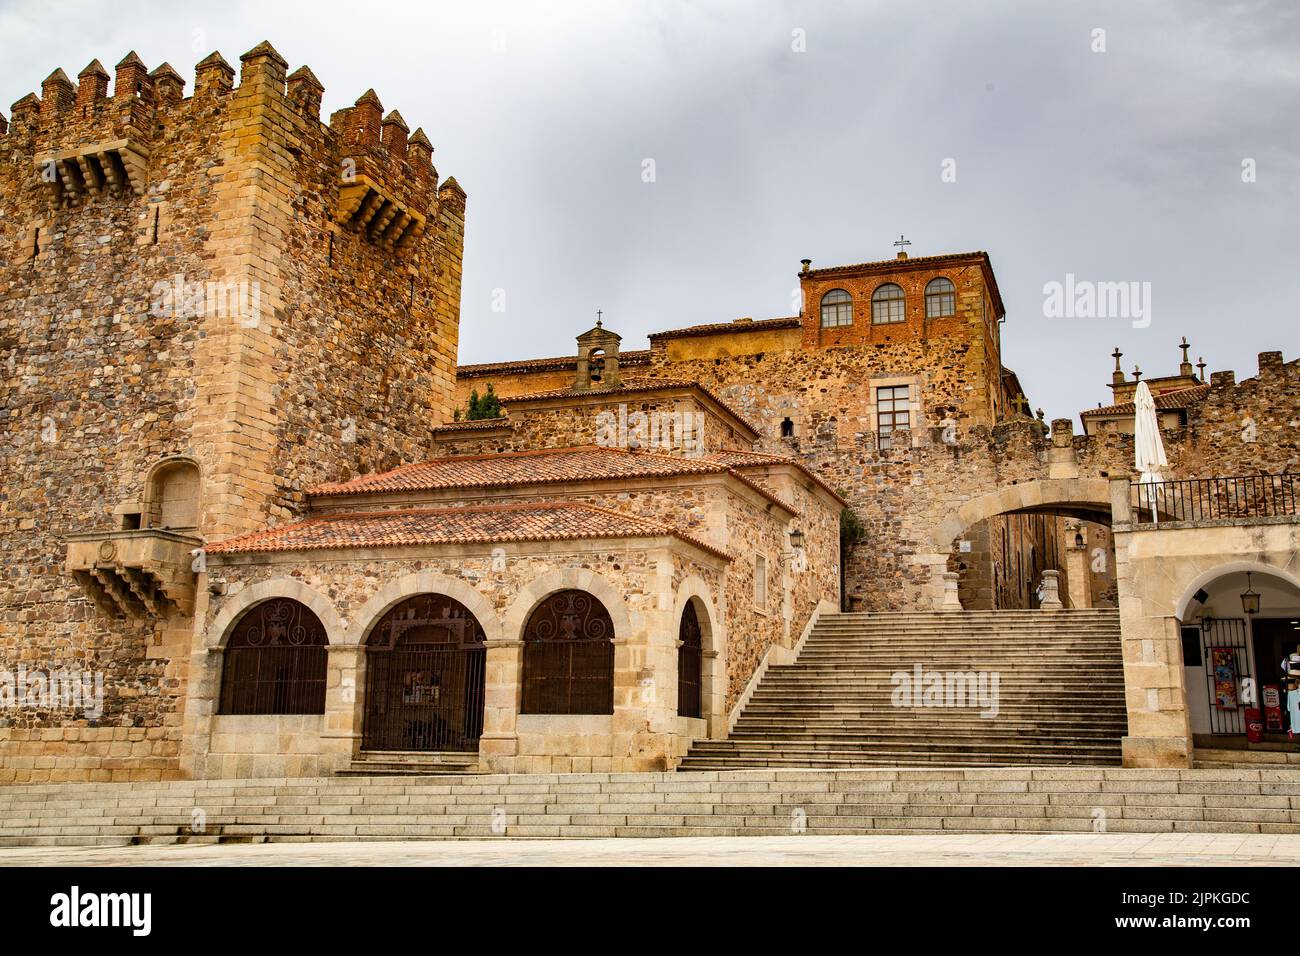 Staircase and square with large arch and round arched buildings Stock Photo